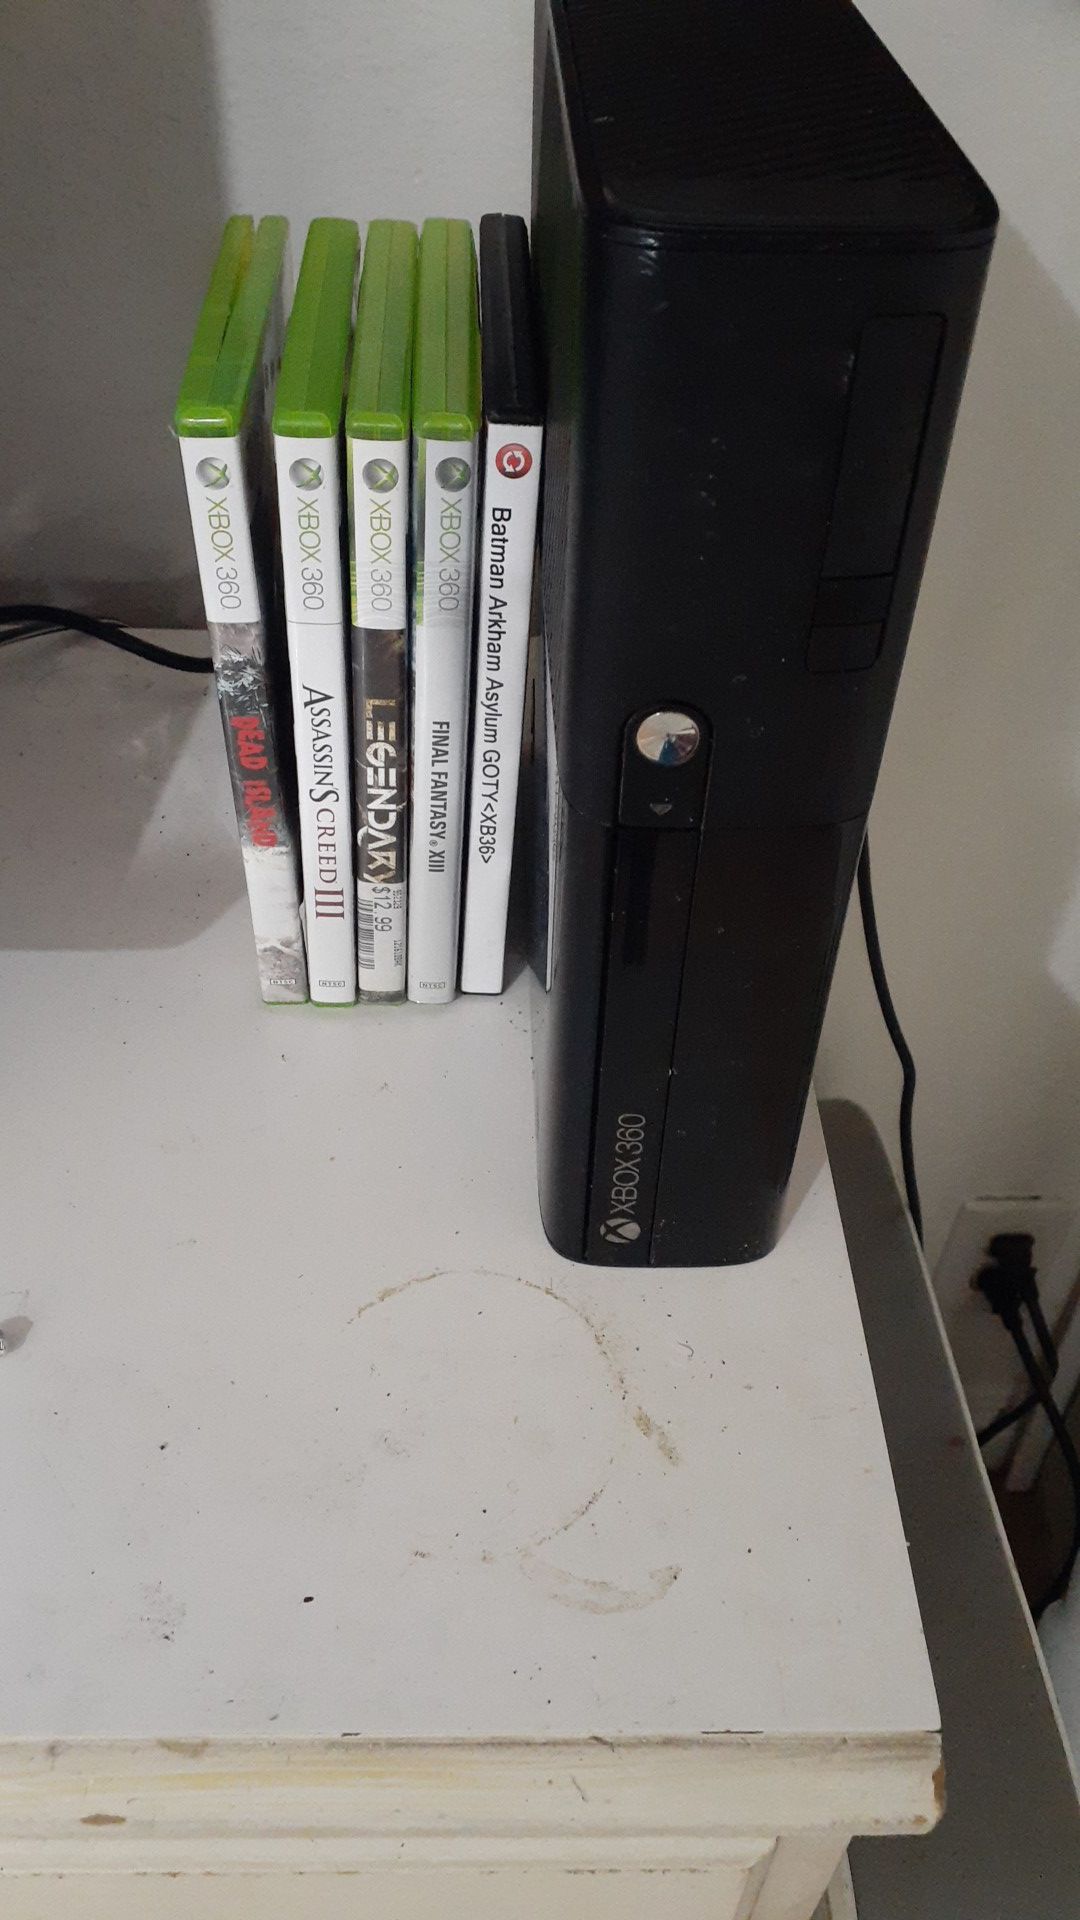 Xbox 360 and five games no controller